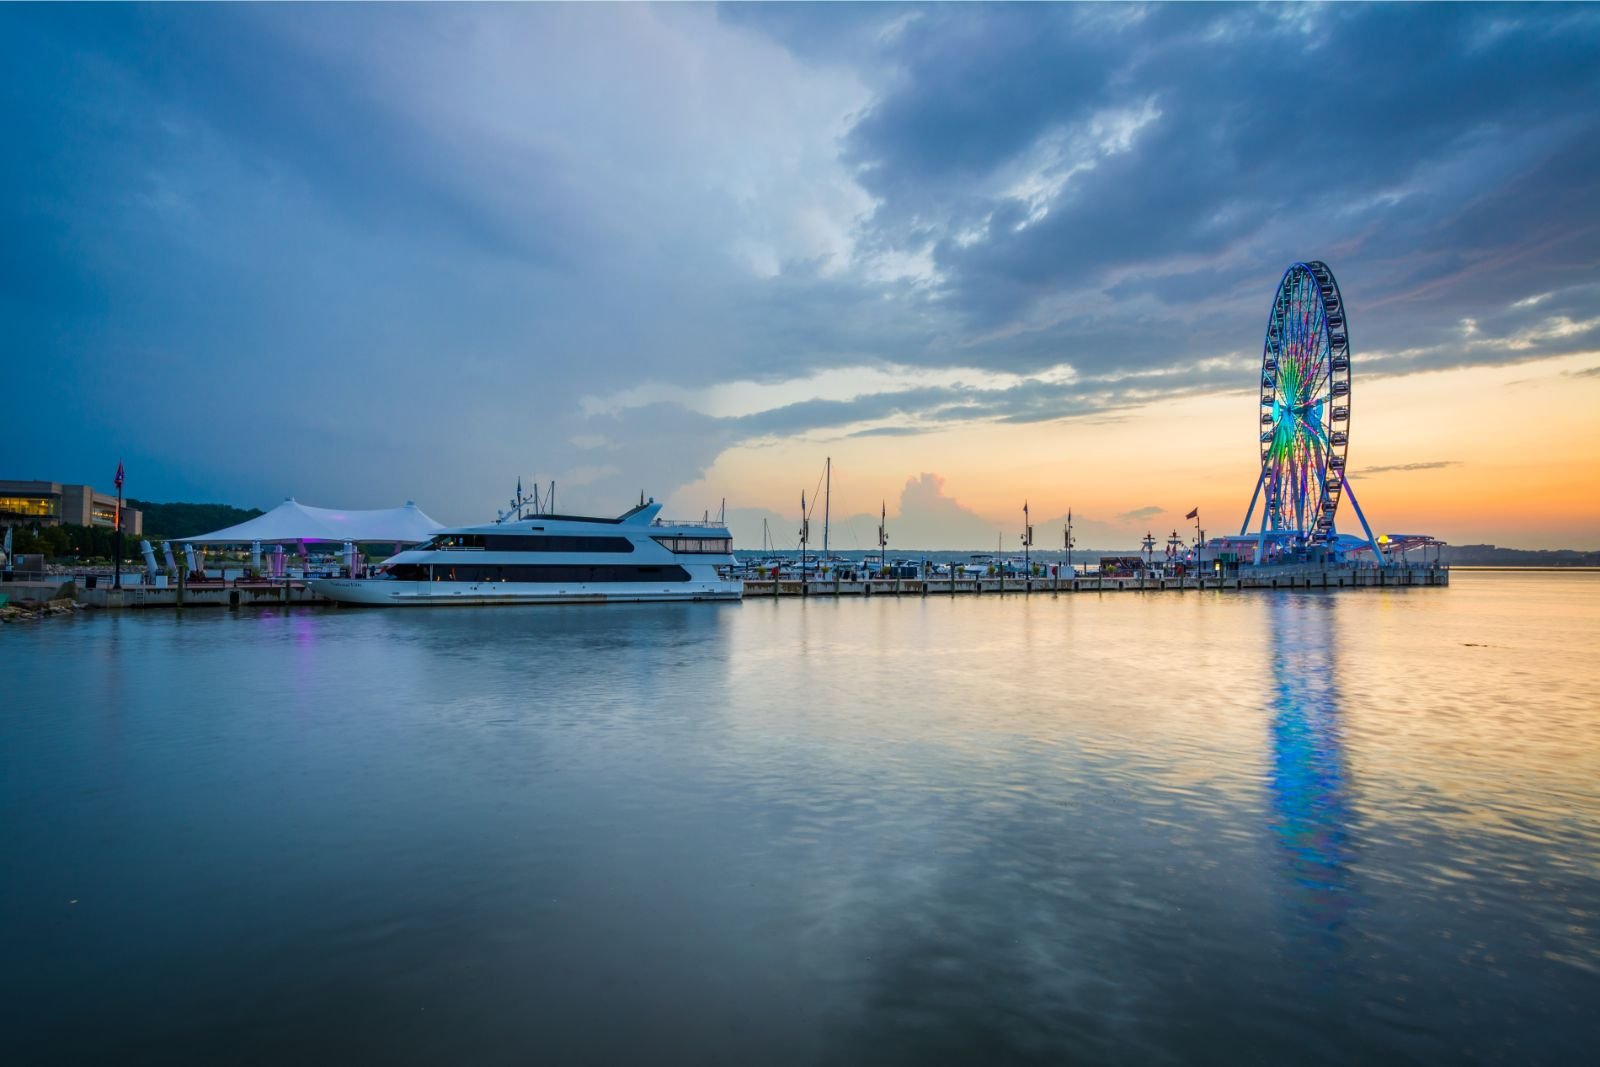 The Capital Wheel in National Harbor Maryland